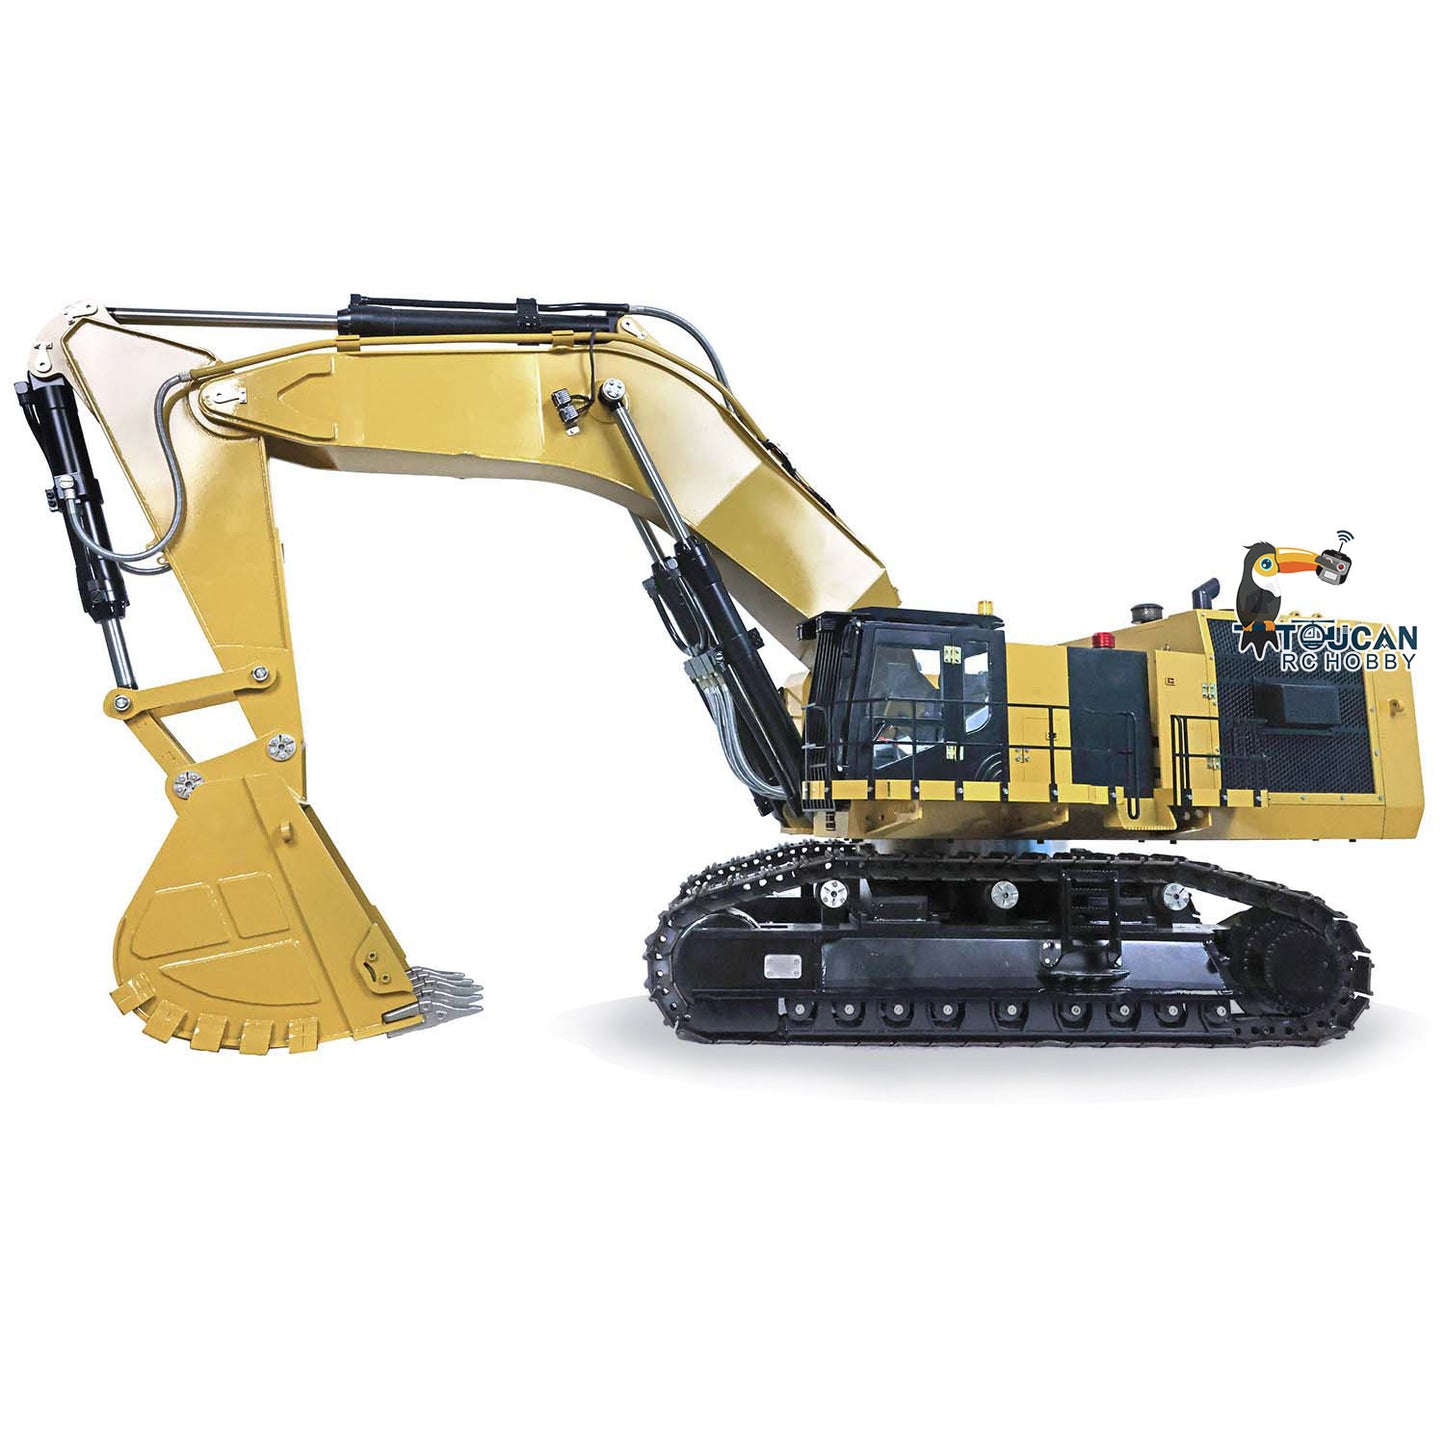 IN STOCK 6015B Metal 1/14 Assembled Hydraulic RC Excavator Remote Control Heavy Duty Diggers Model PL18Lite ESC Construction Cars